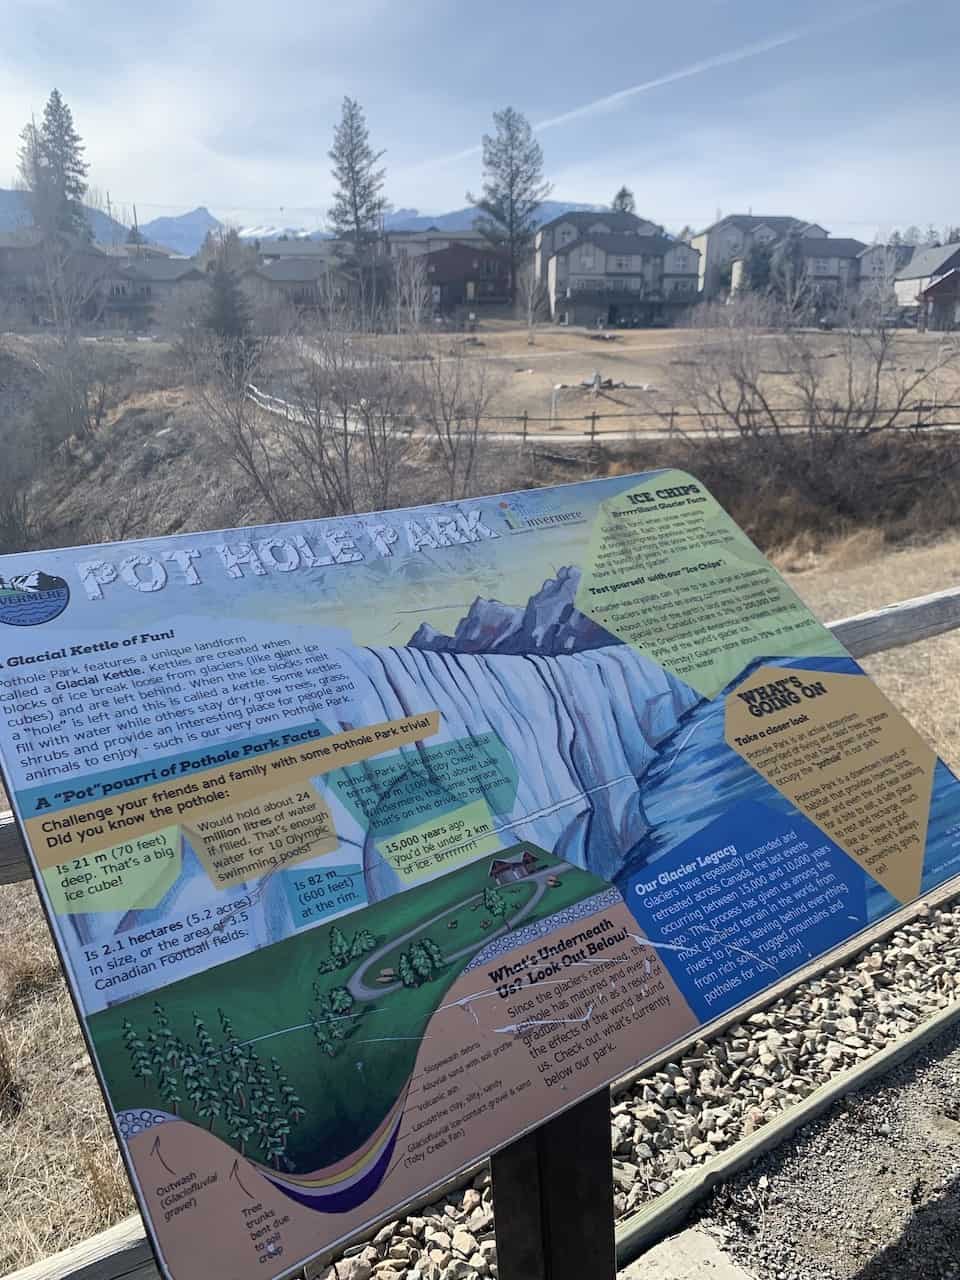 Pothole Park Invermere Information Sign - The informational sign at Pothole Park in Invermere, BC, provides visitors with pothole facts and trivia.